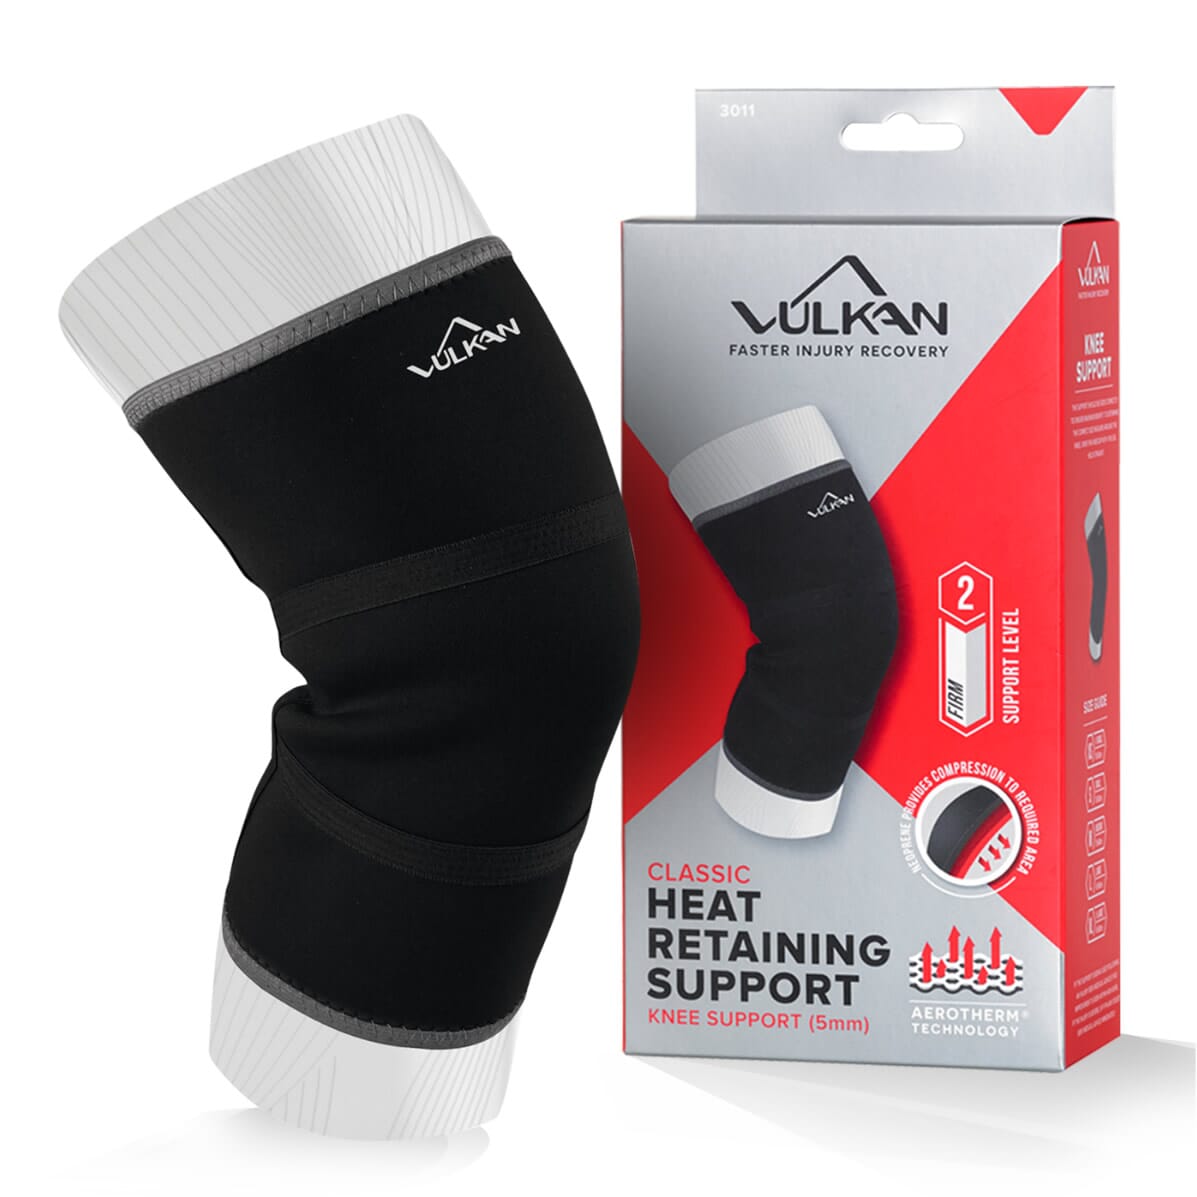 View Knee Support Vulkan XLarge 3mm thick information